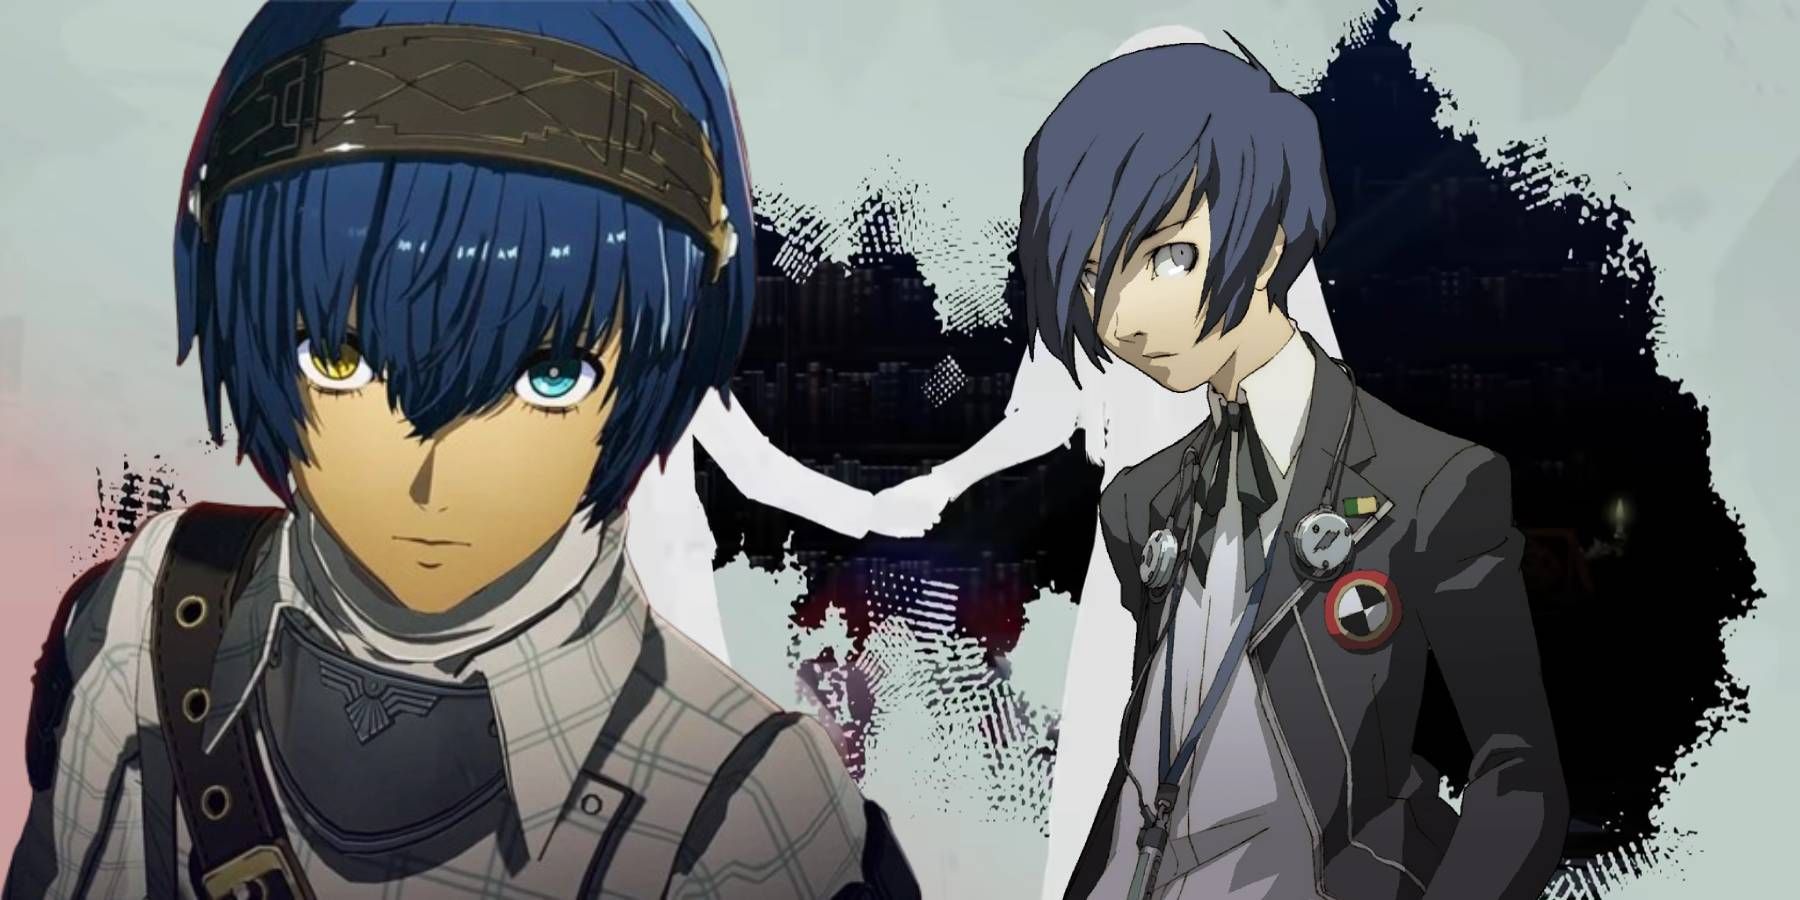 The protagonists of Metaphor: ReFantazio and Persona 3 over a shot of a handshake from Metaphor: ReFantazio